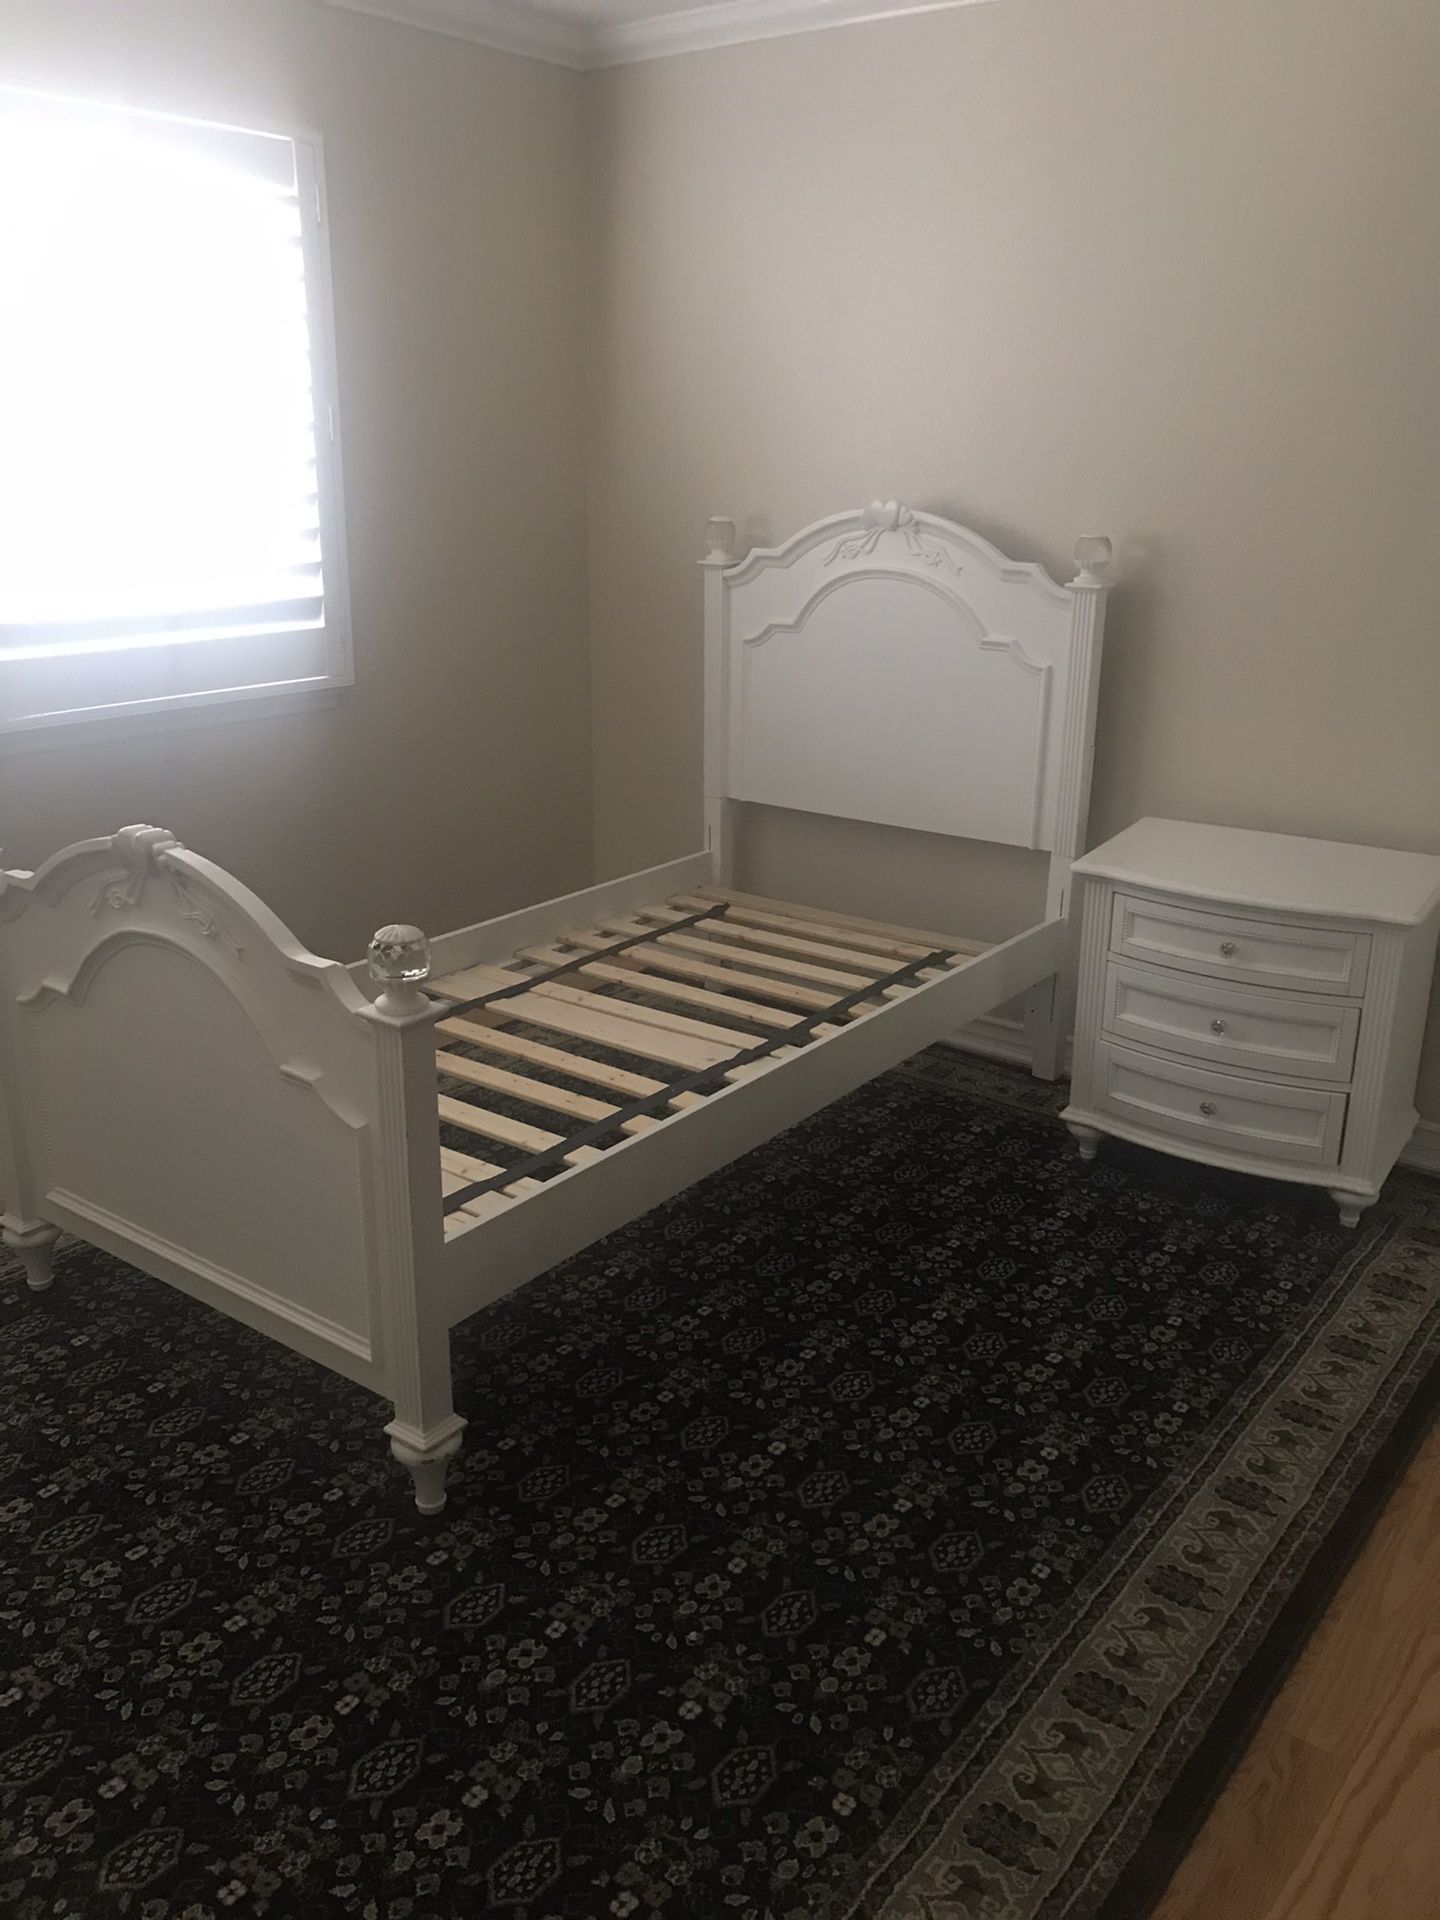 Twin bed frame and nightstand